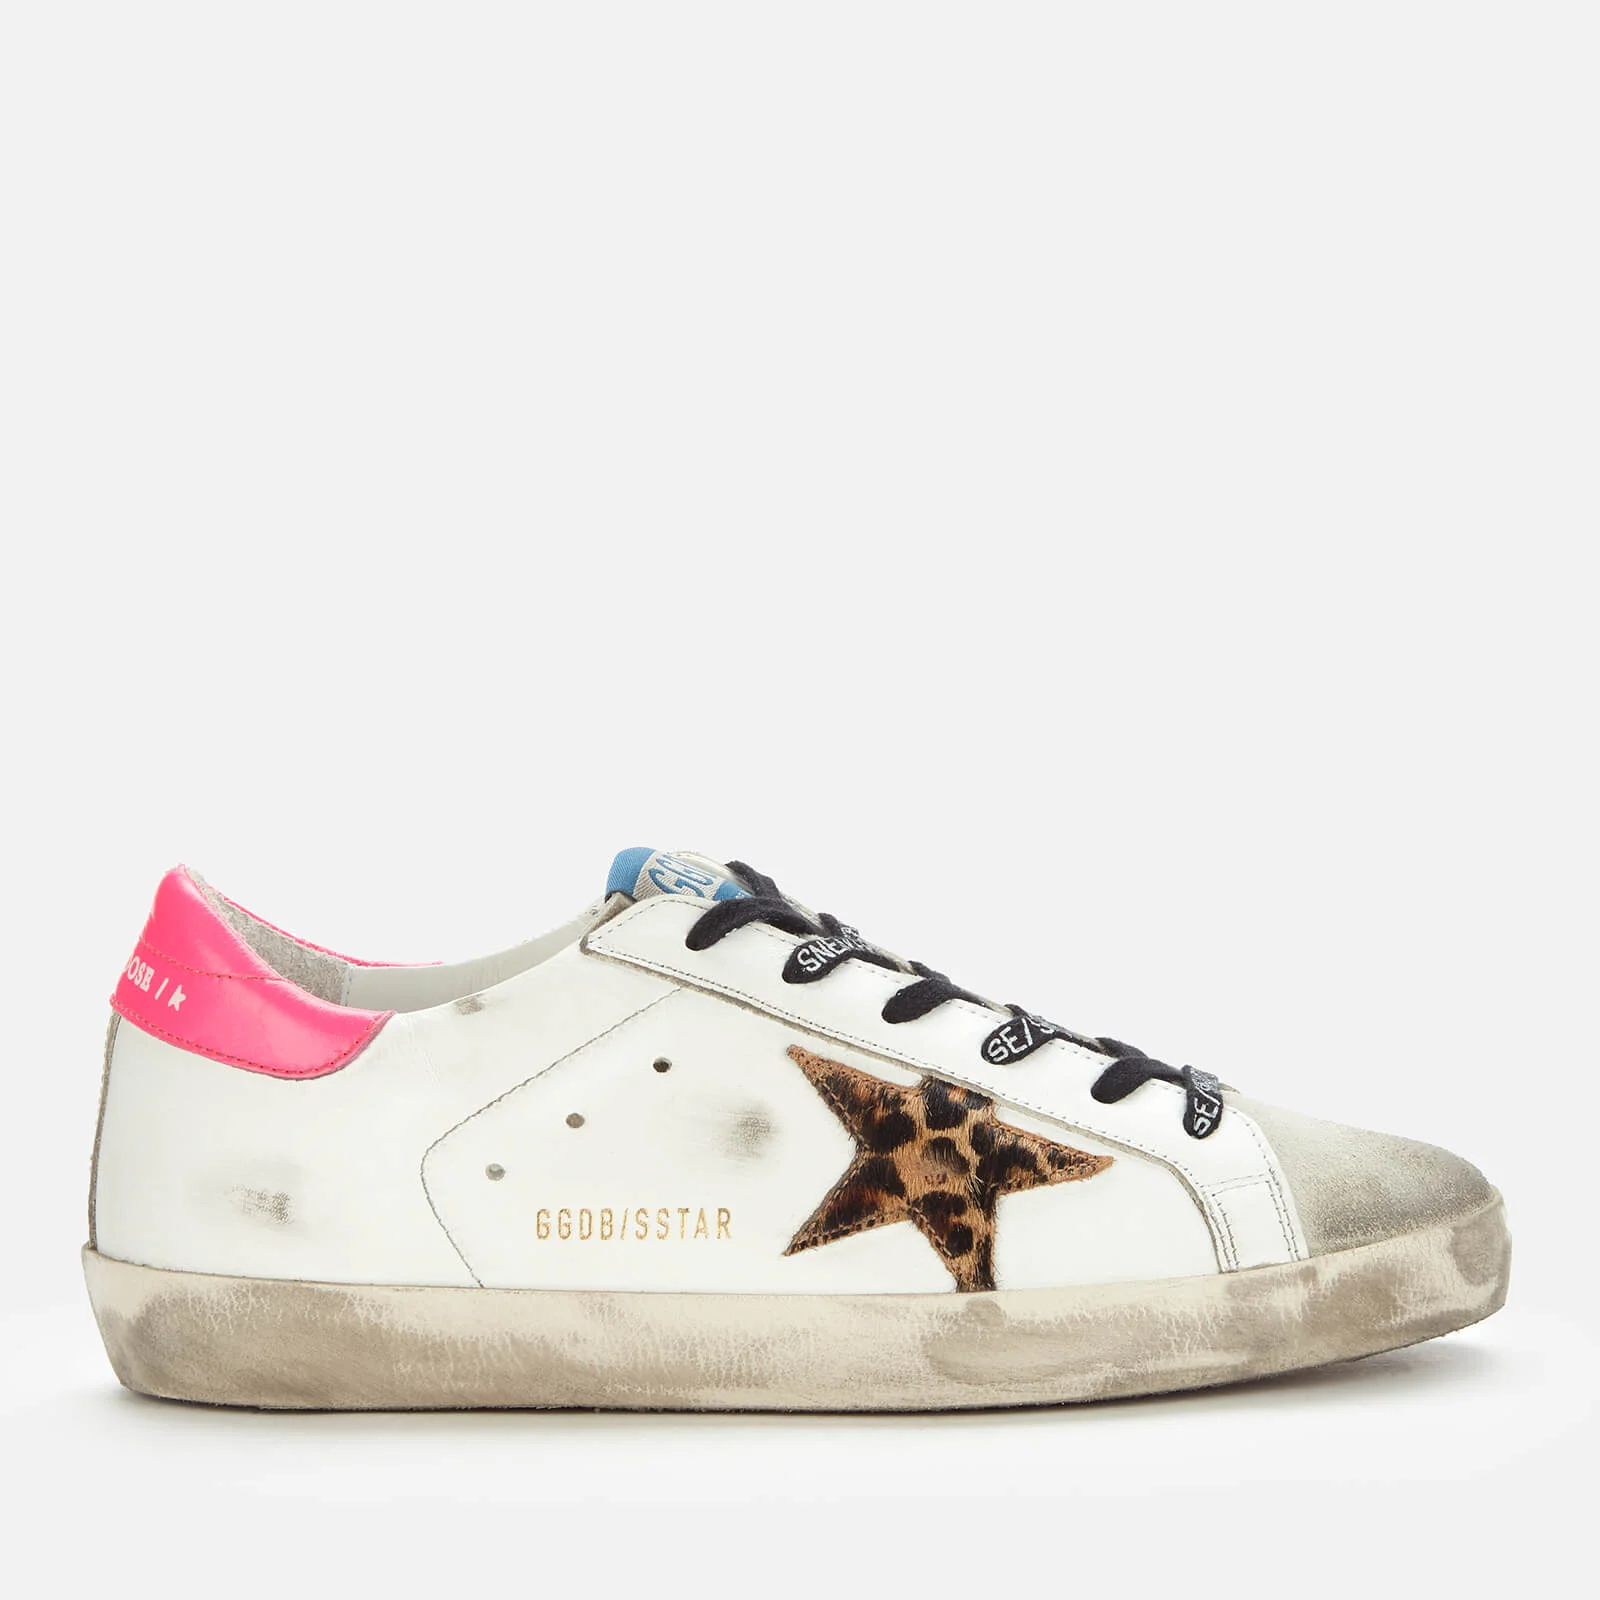 Golden Goose Women's Superstar Leather Trainers - Ice/White/Leopard Image 1